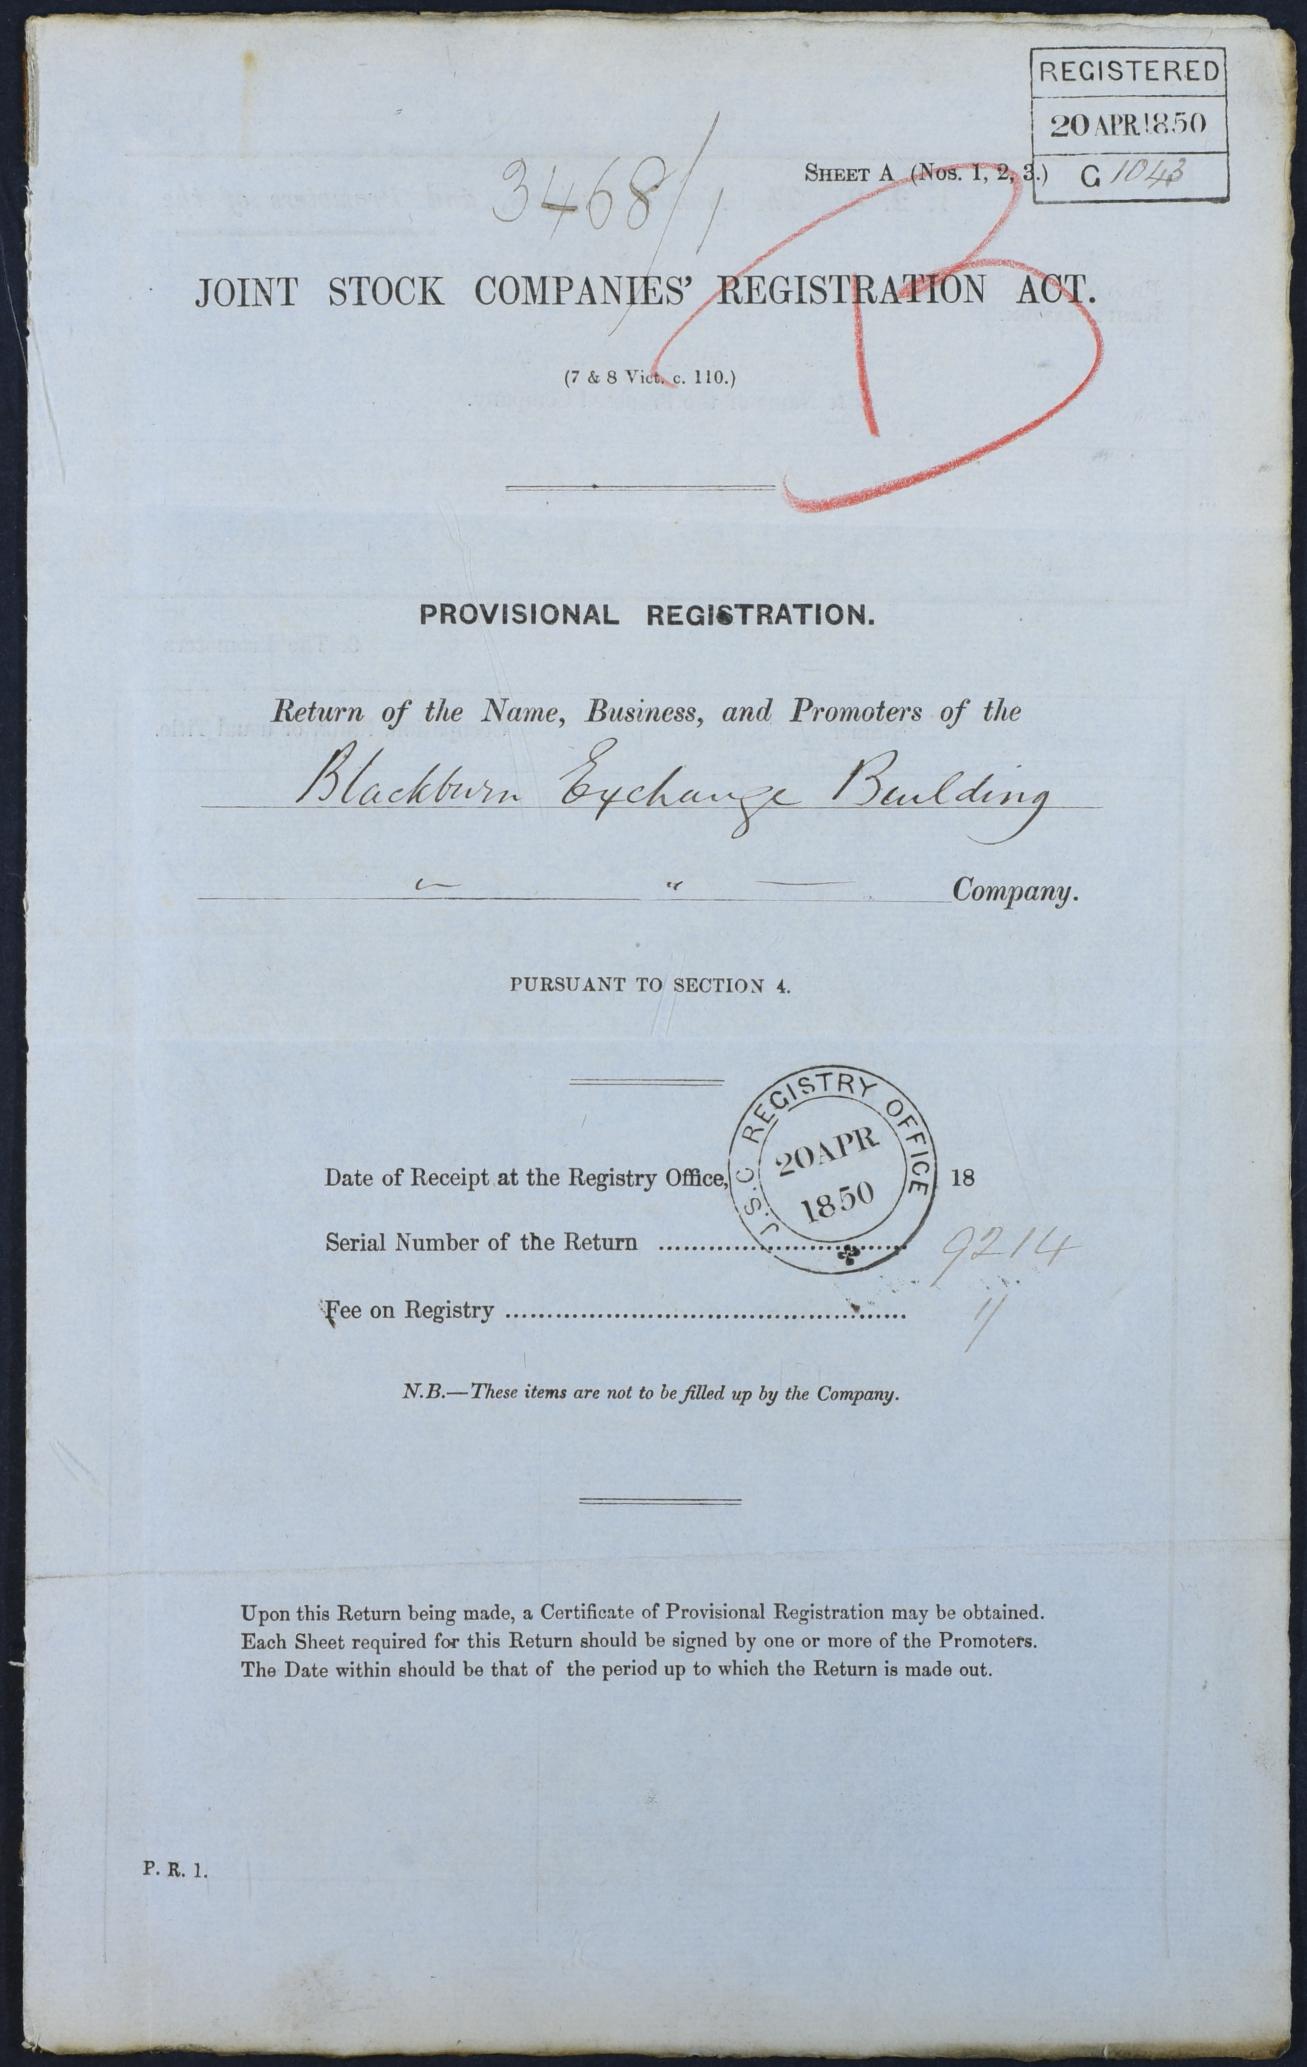 Registration document for the Blackburn Exchange Building Company, dated 1850